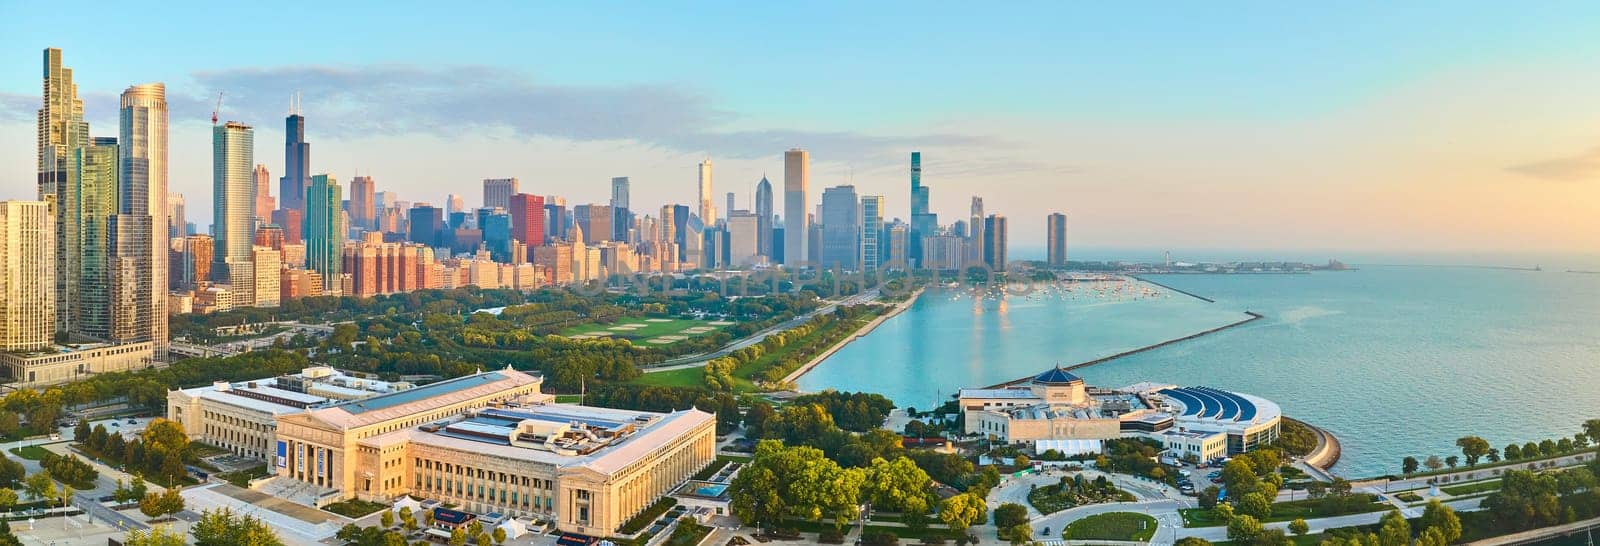 Aerial Chicago Skyline at Golden Hour with Lake Michigan Panorama by njproductions